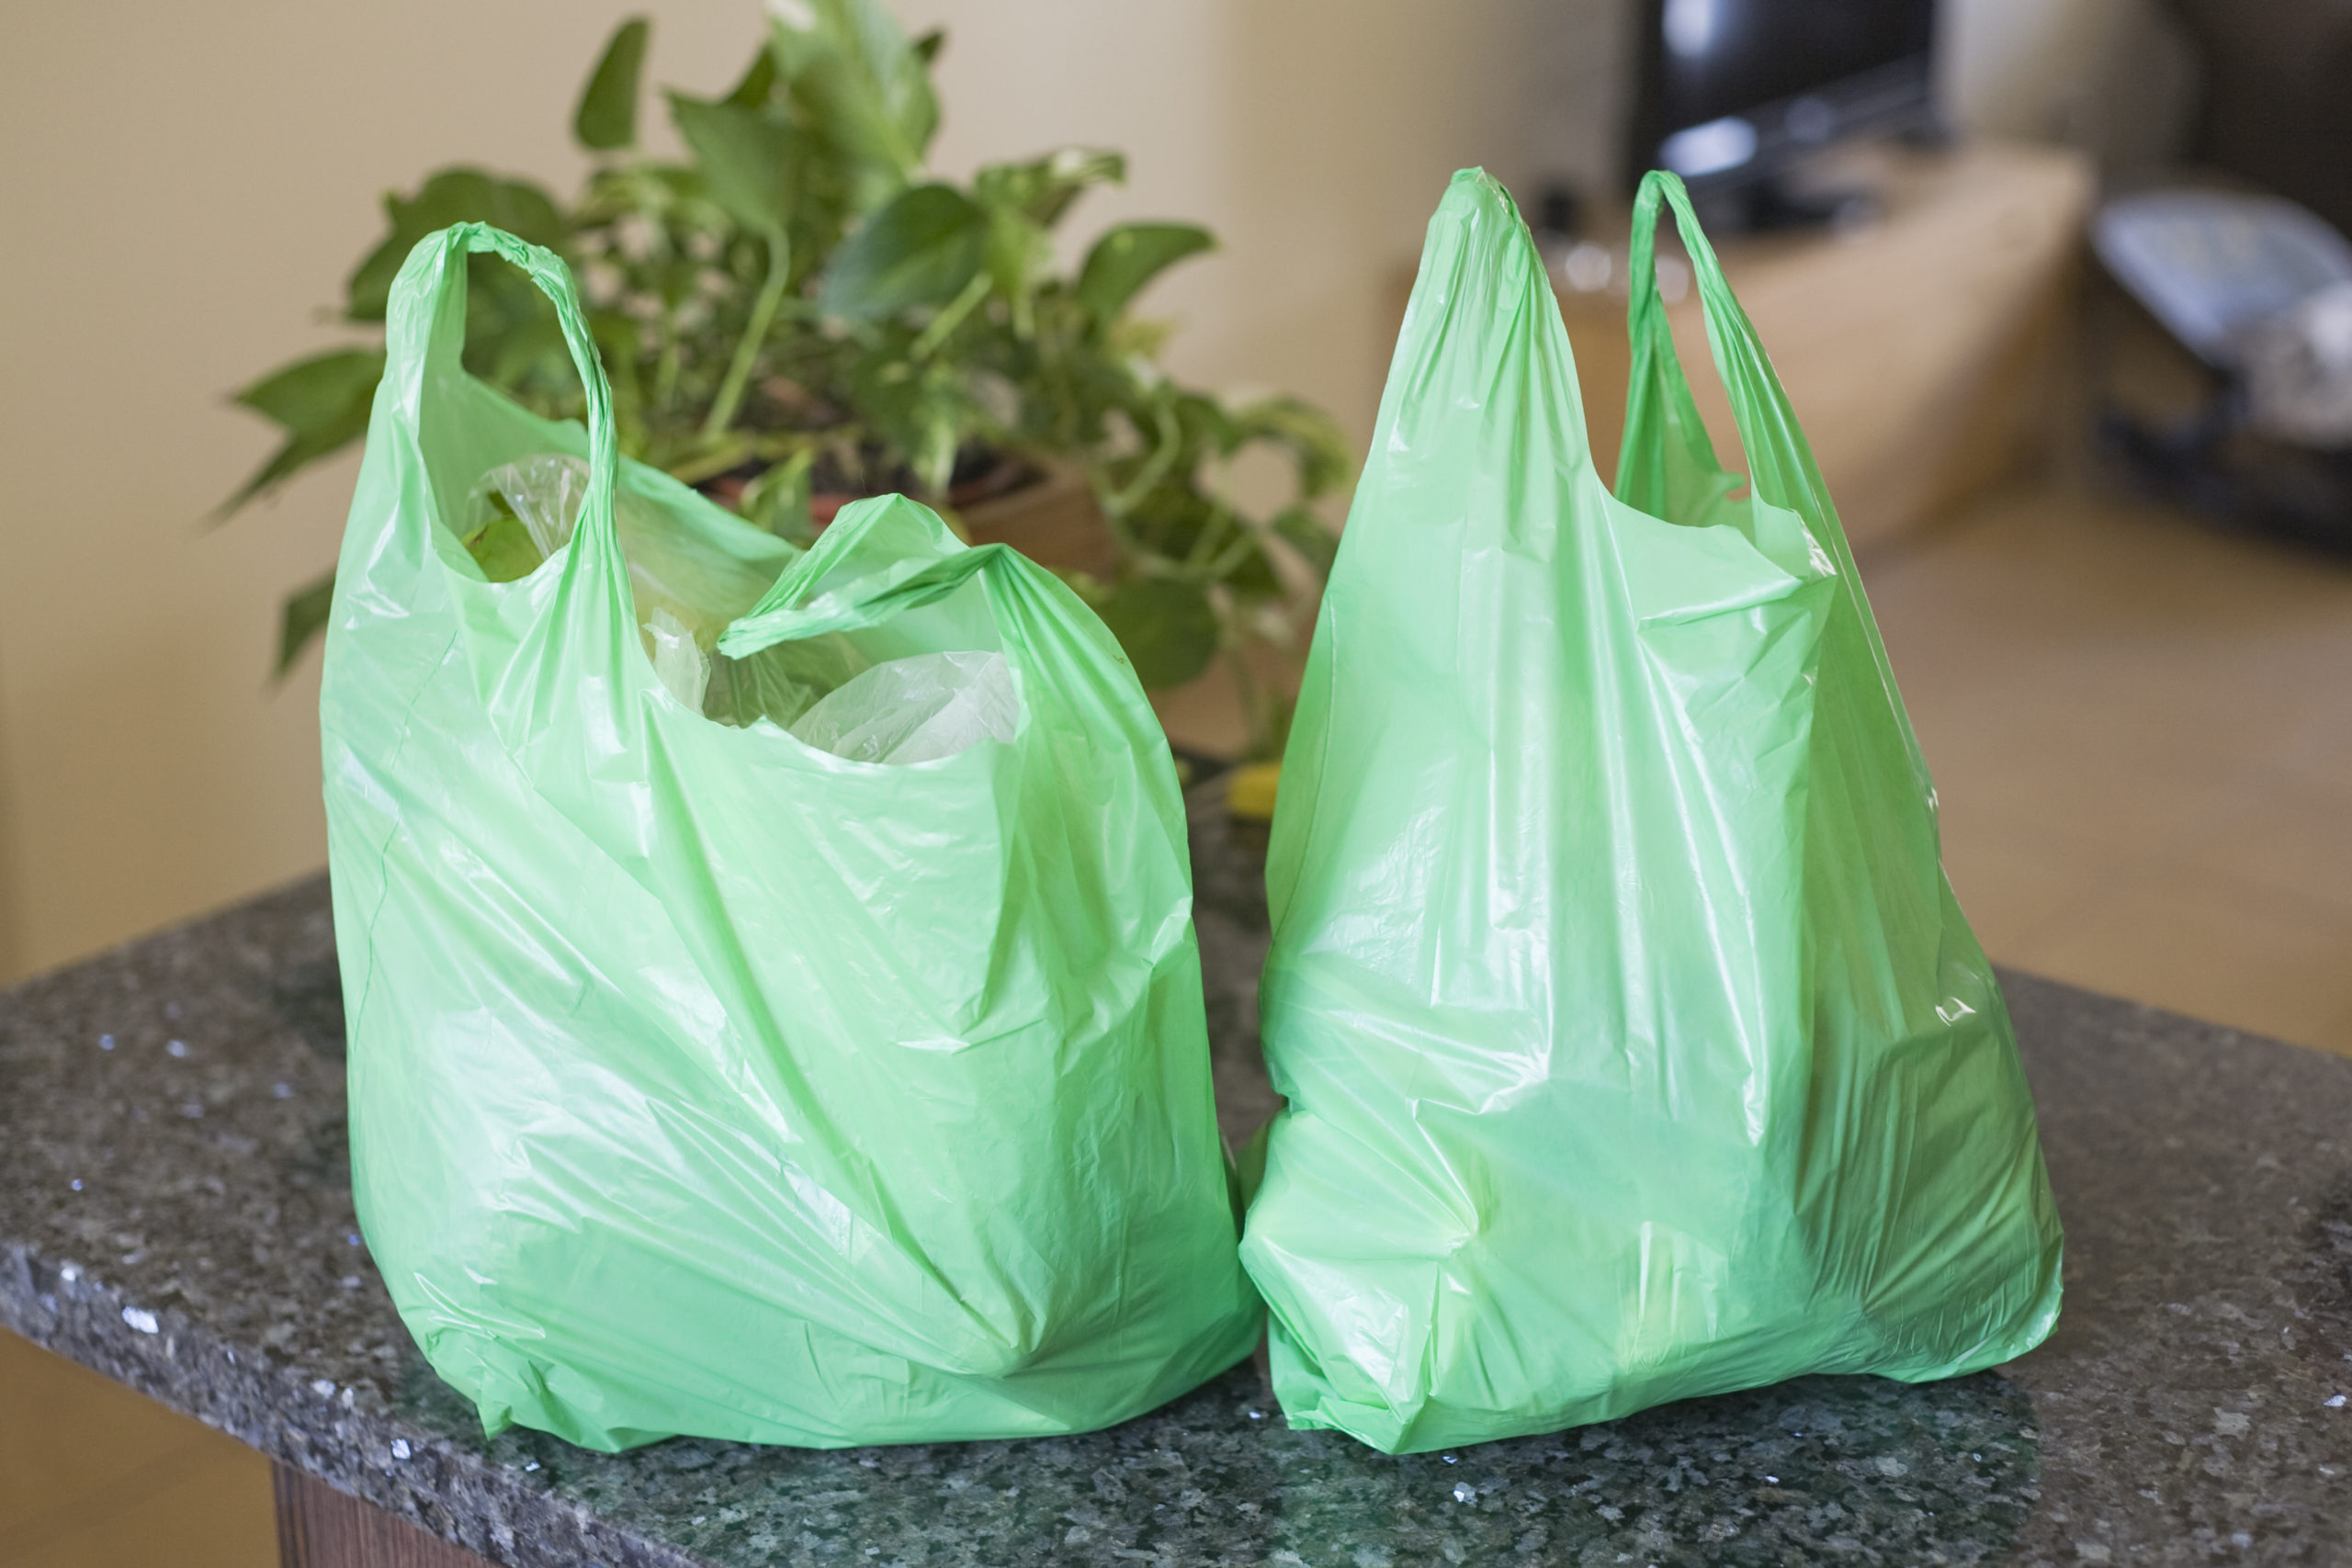 Sharjah to ban single-use plastic bags from January 1, 2024